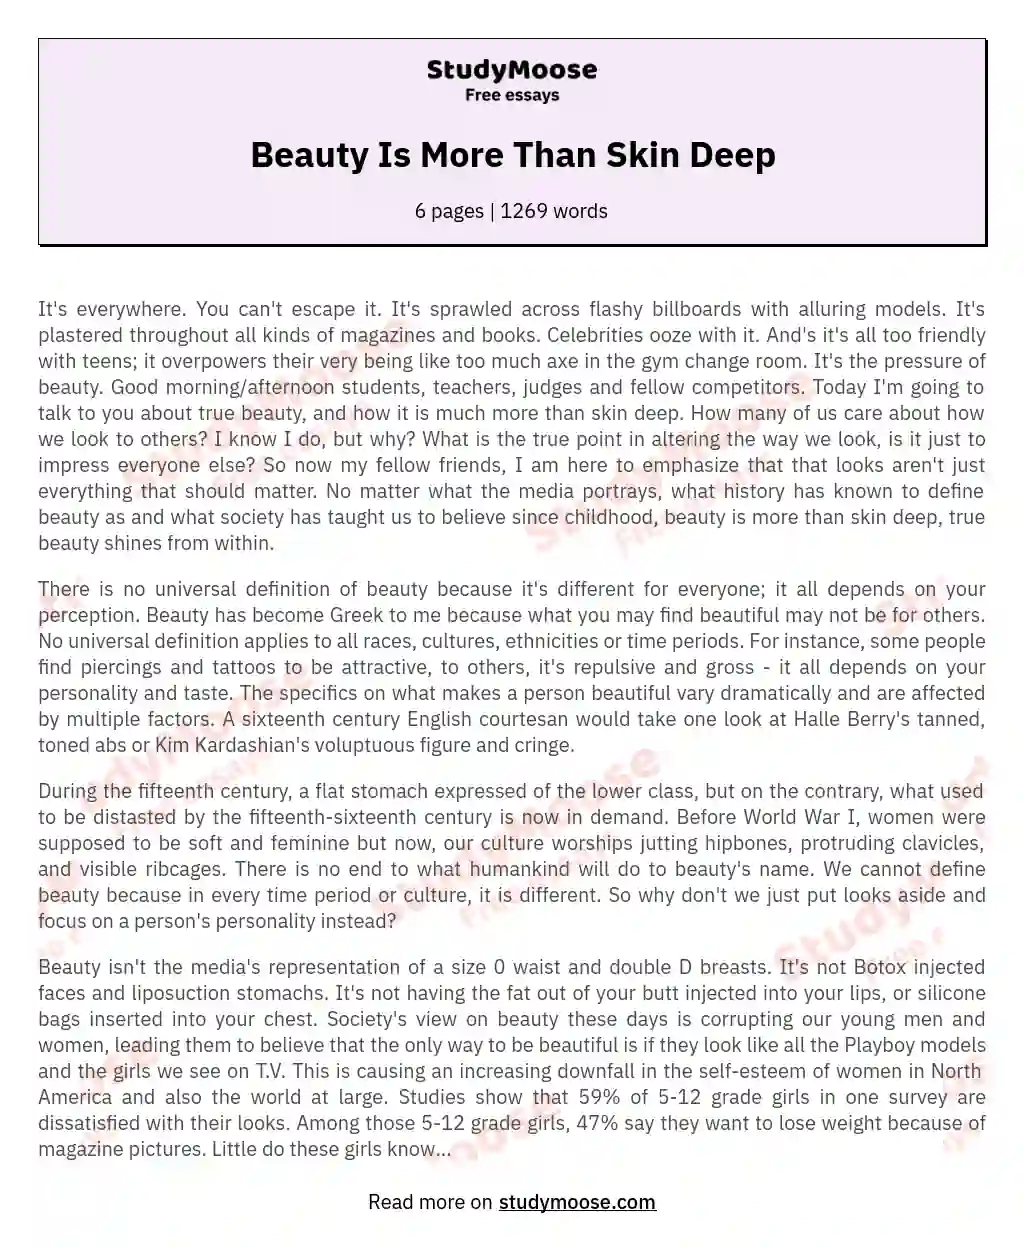 Beauty Is More Than Skin Deep essay